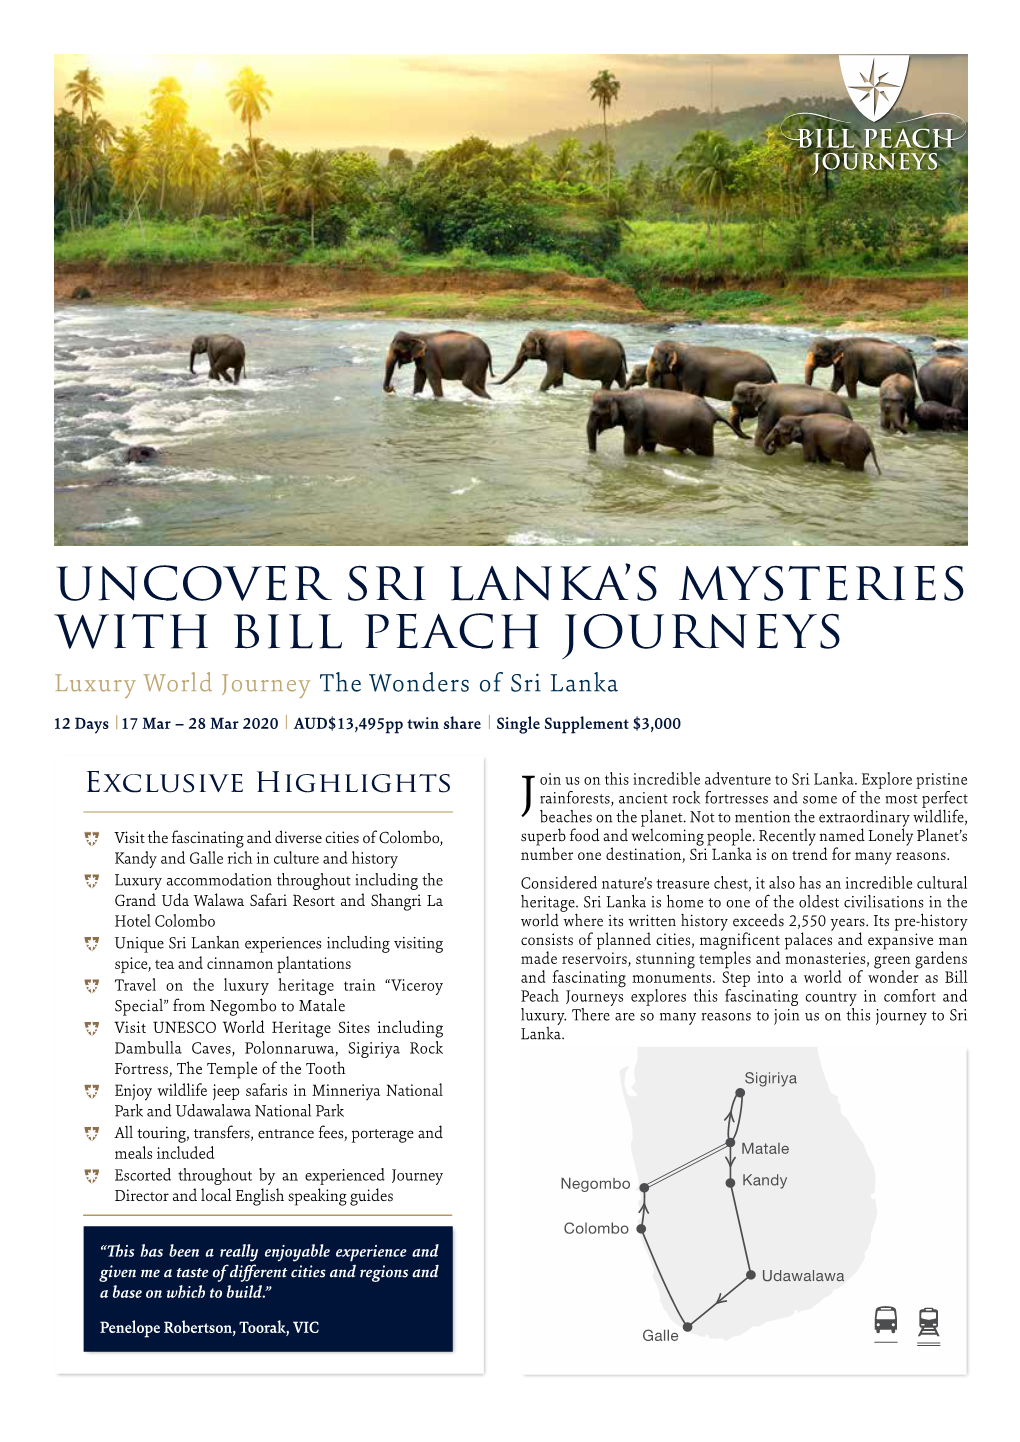 Uncover Sri Lanka's Mysteries with Bill Peach Journeys